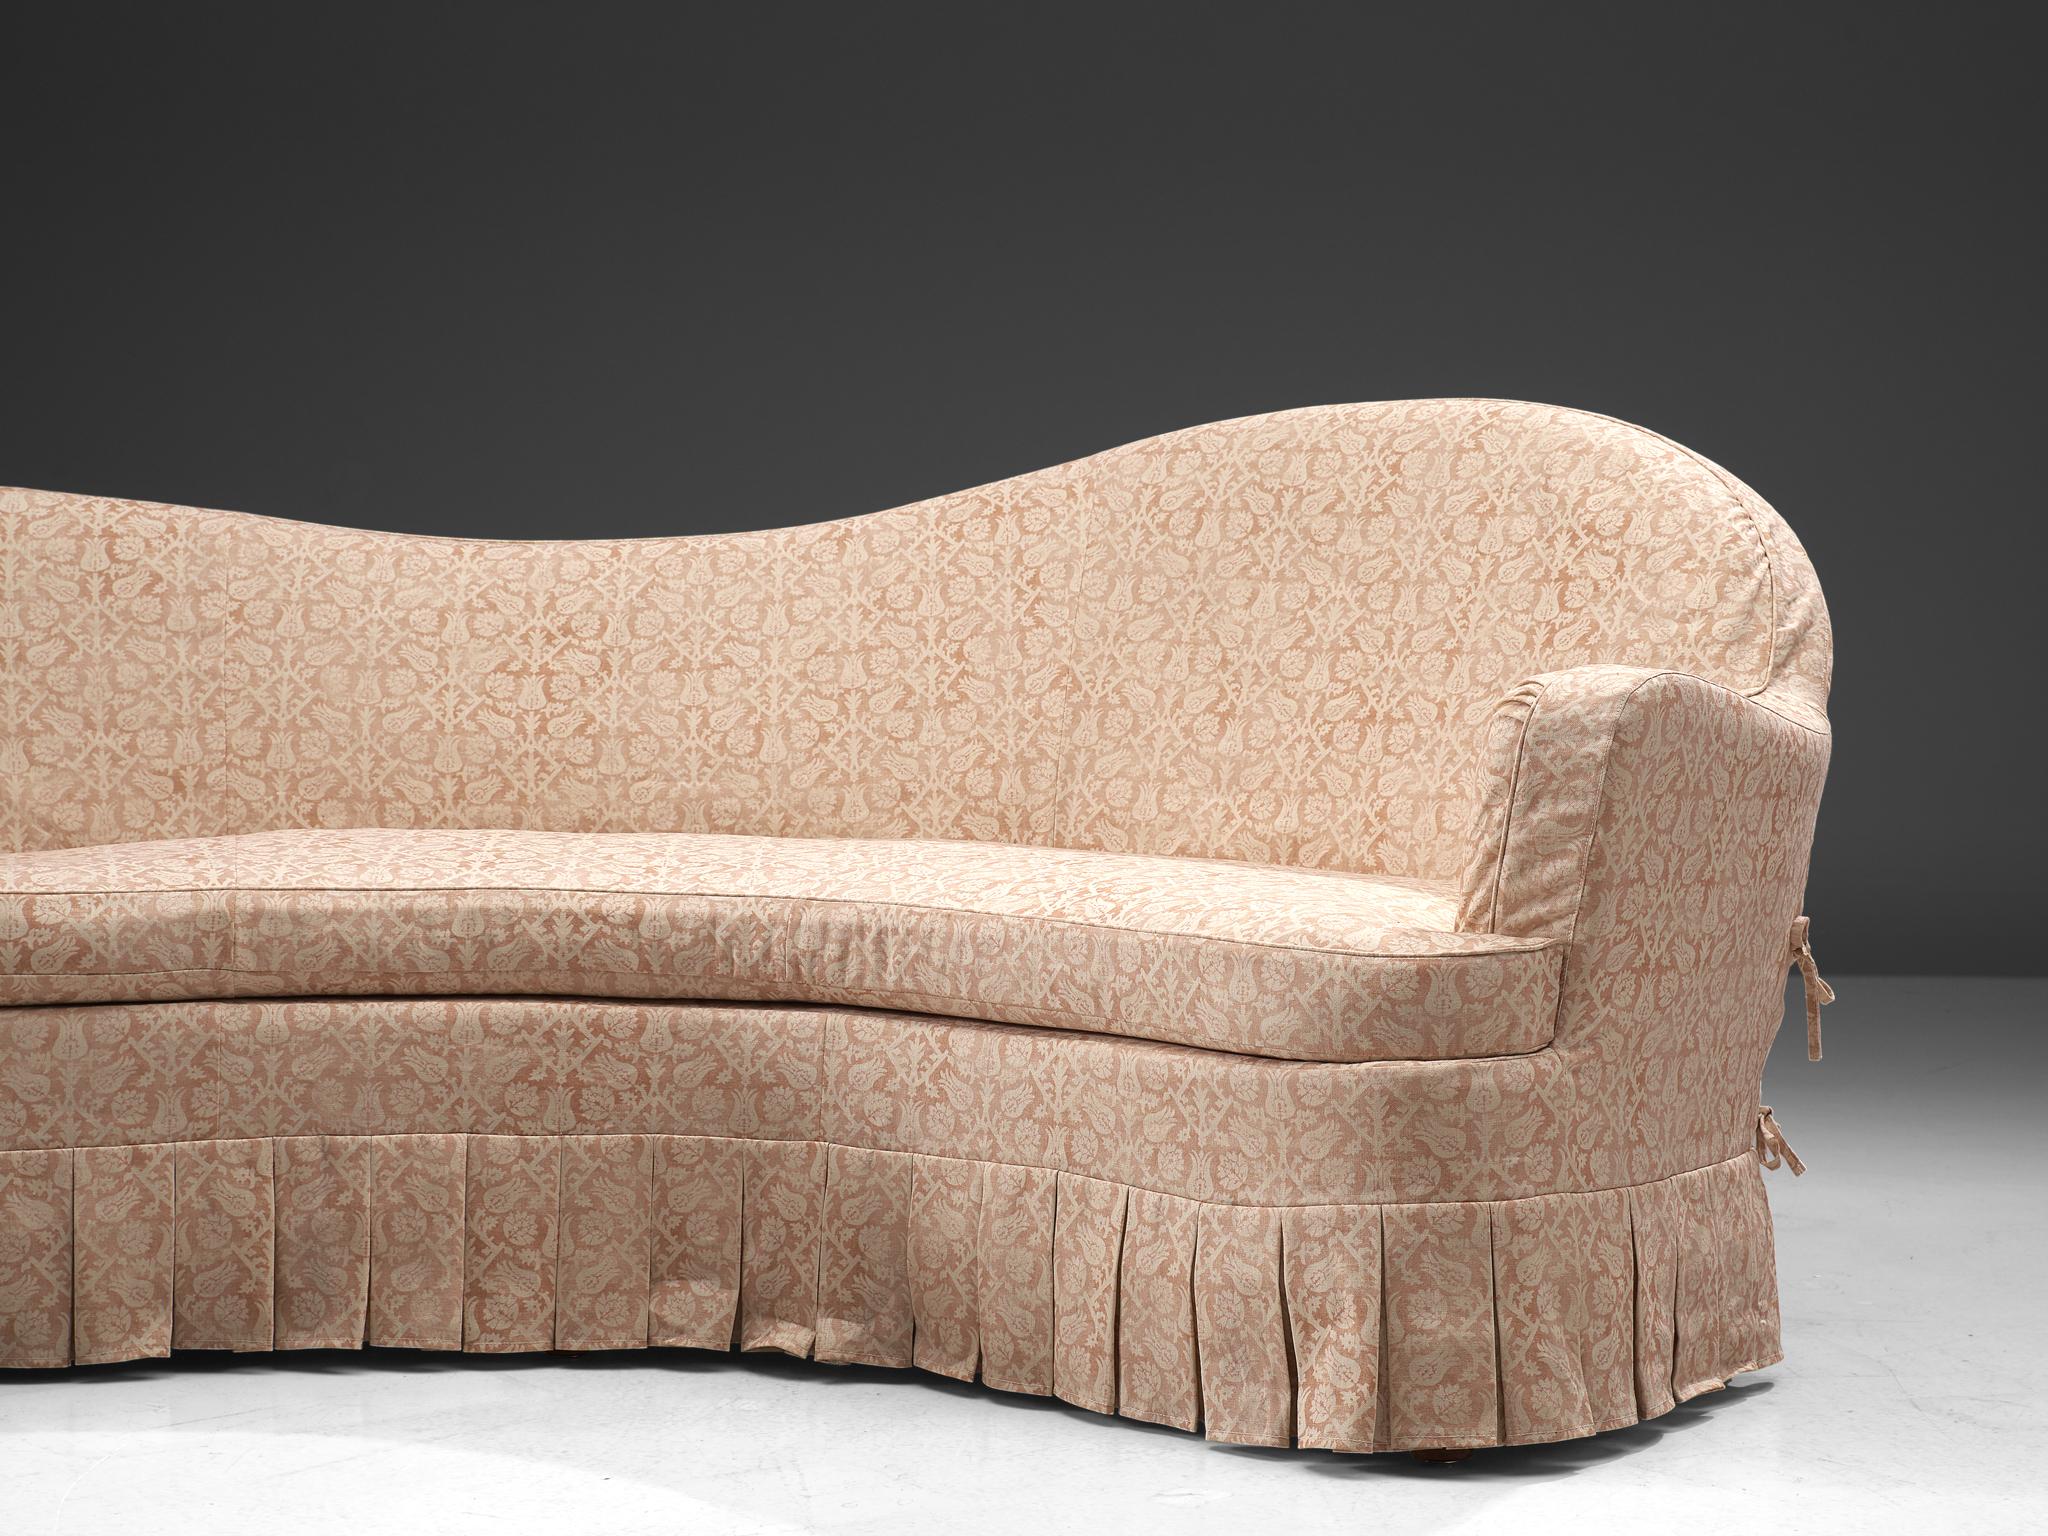 Art Deco French Curved Sofa in ZAK+FOX ‘Fantasma’ Collection 2020 Upholstery